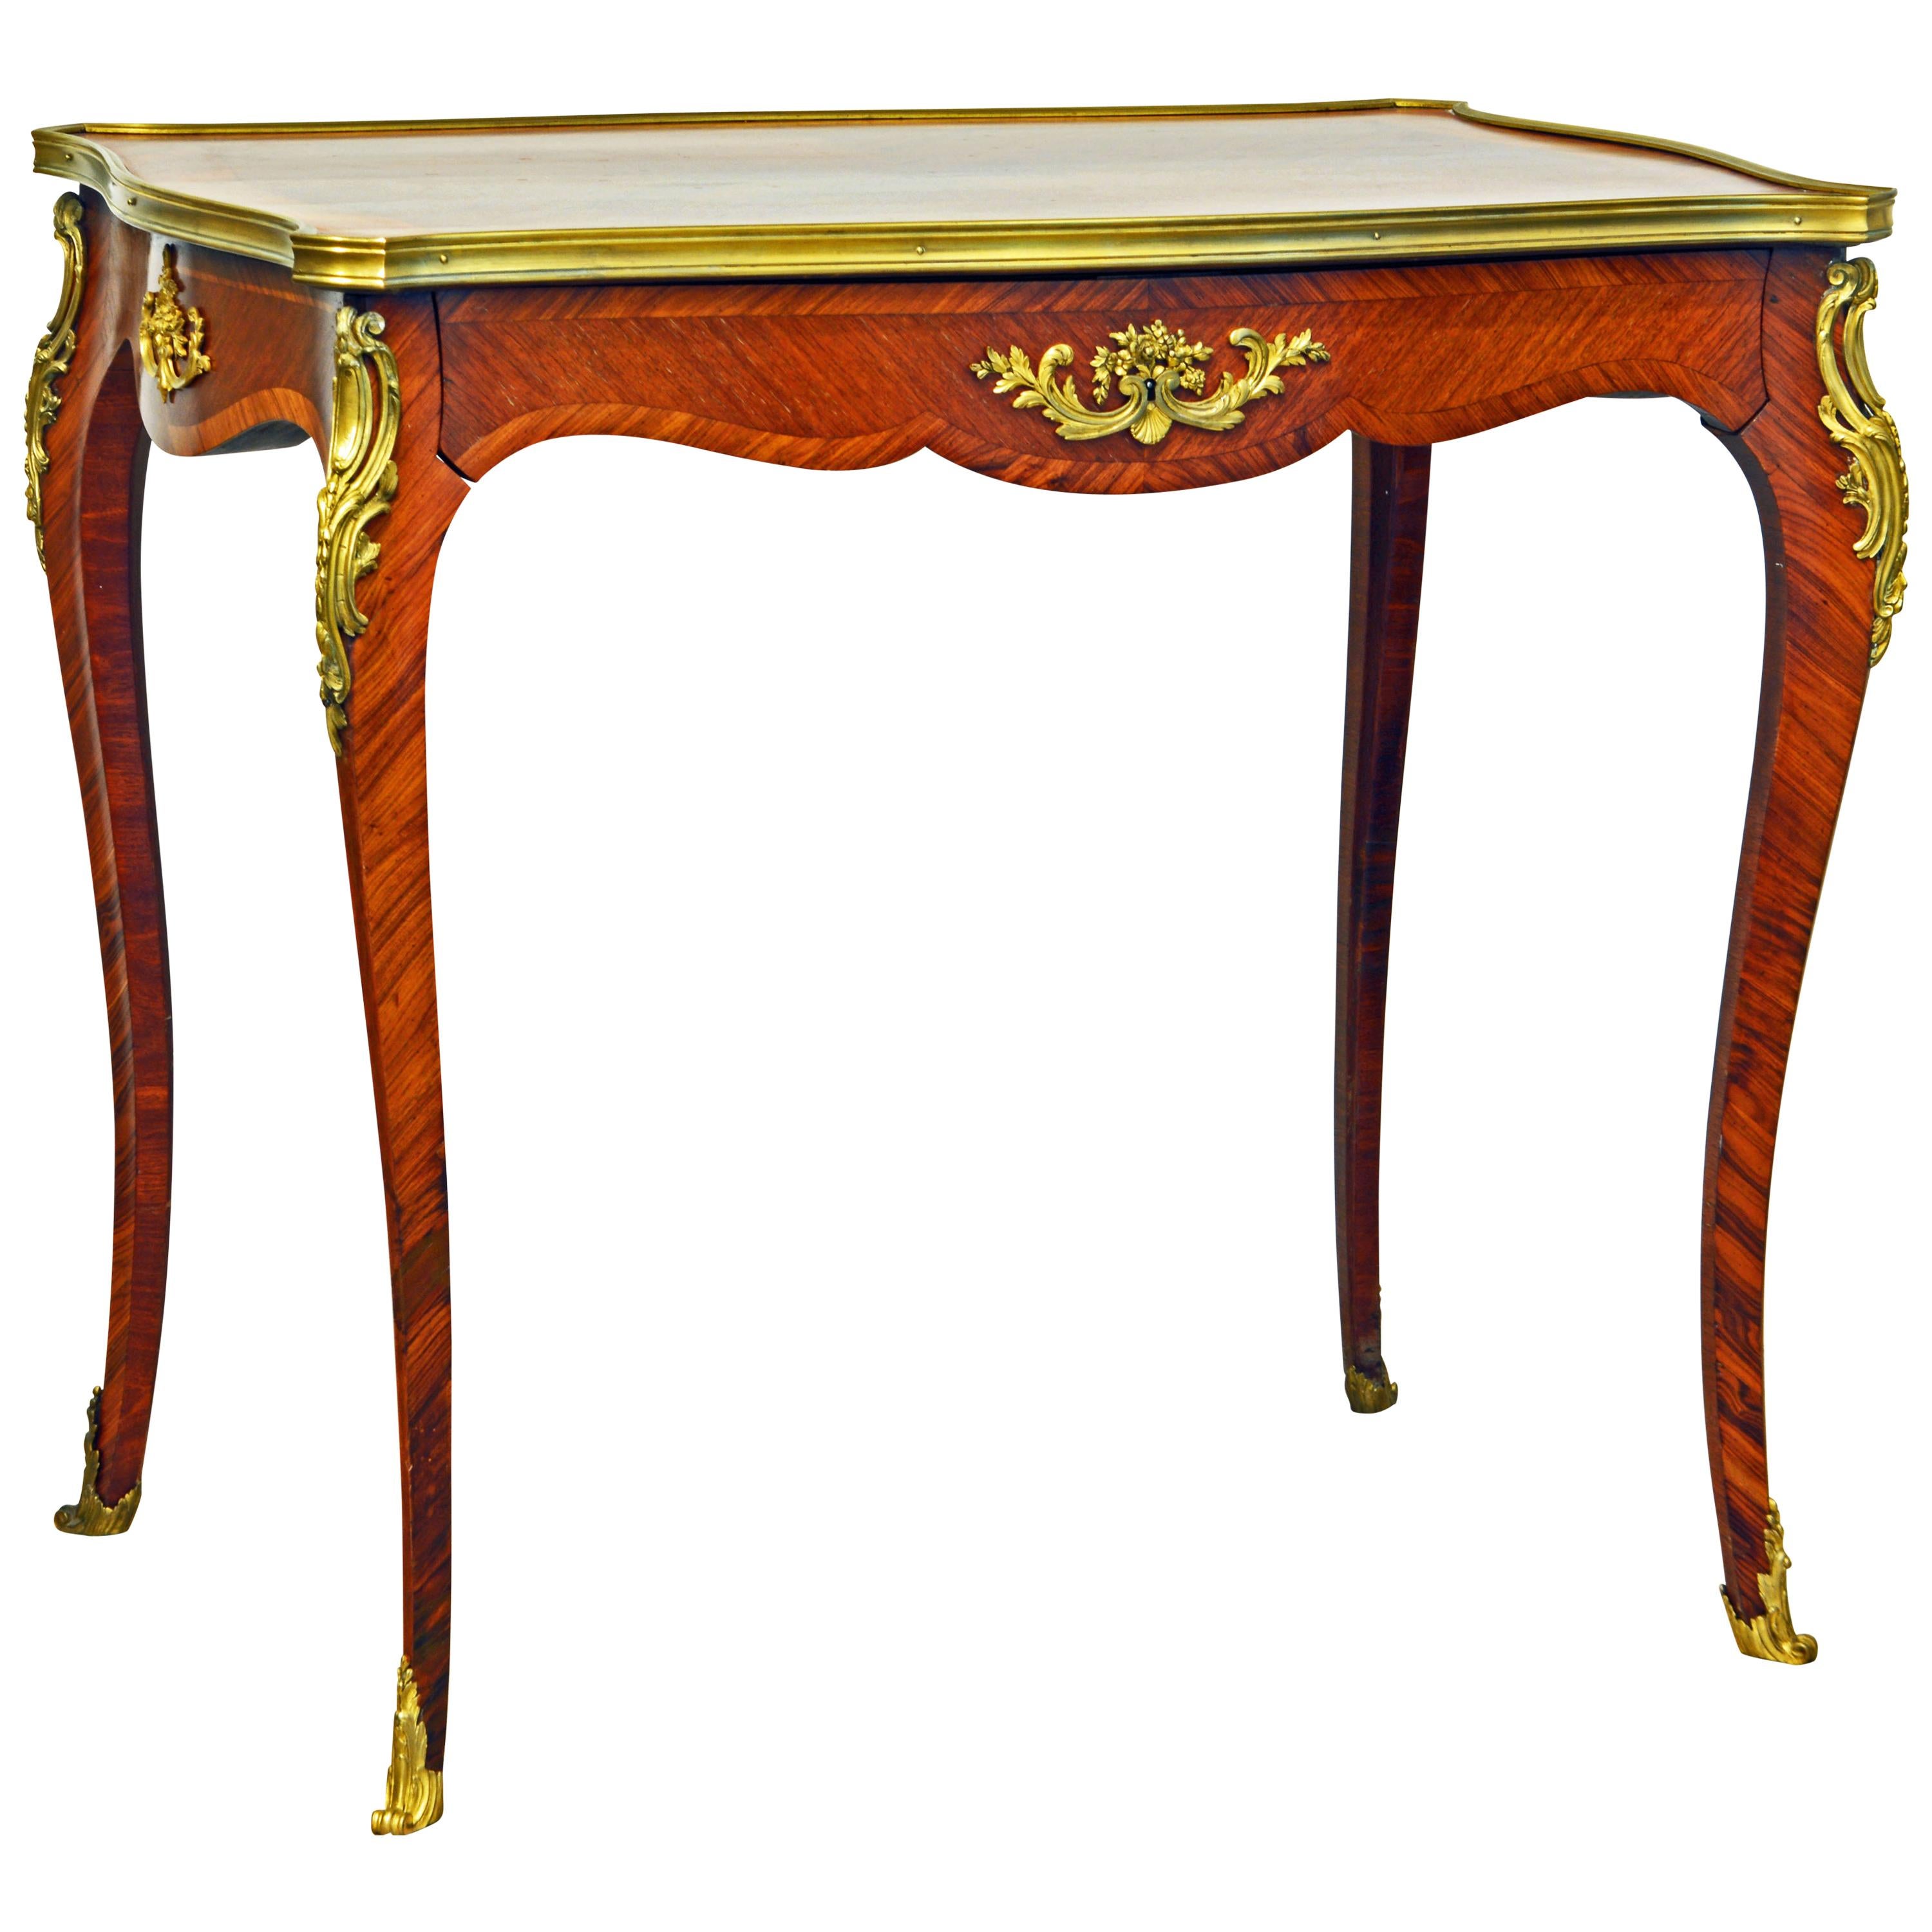 French Ormolu Mounted Louis XV Style Parquetry Table with Concealed Drawer